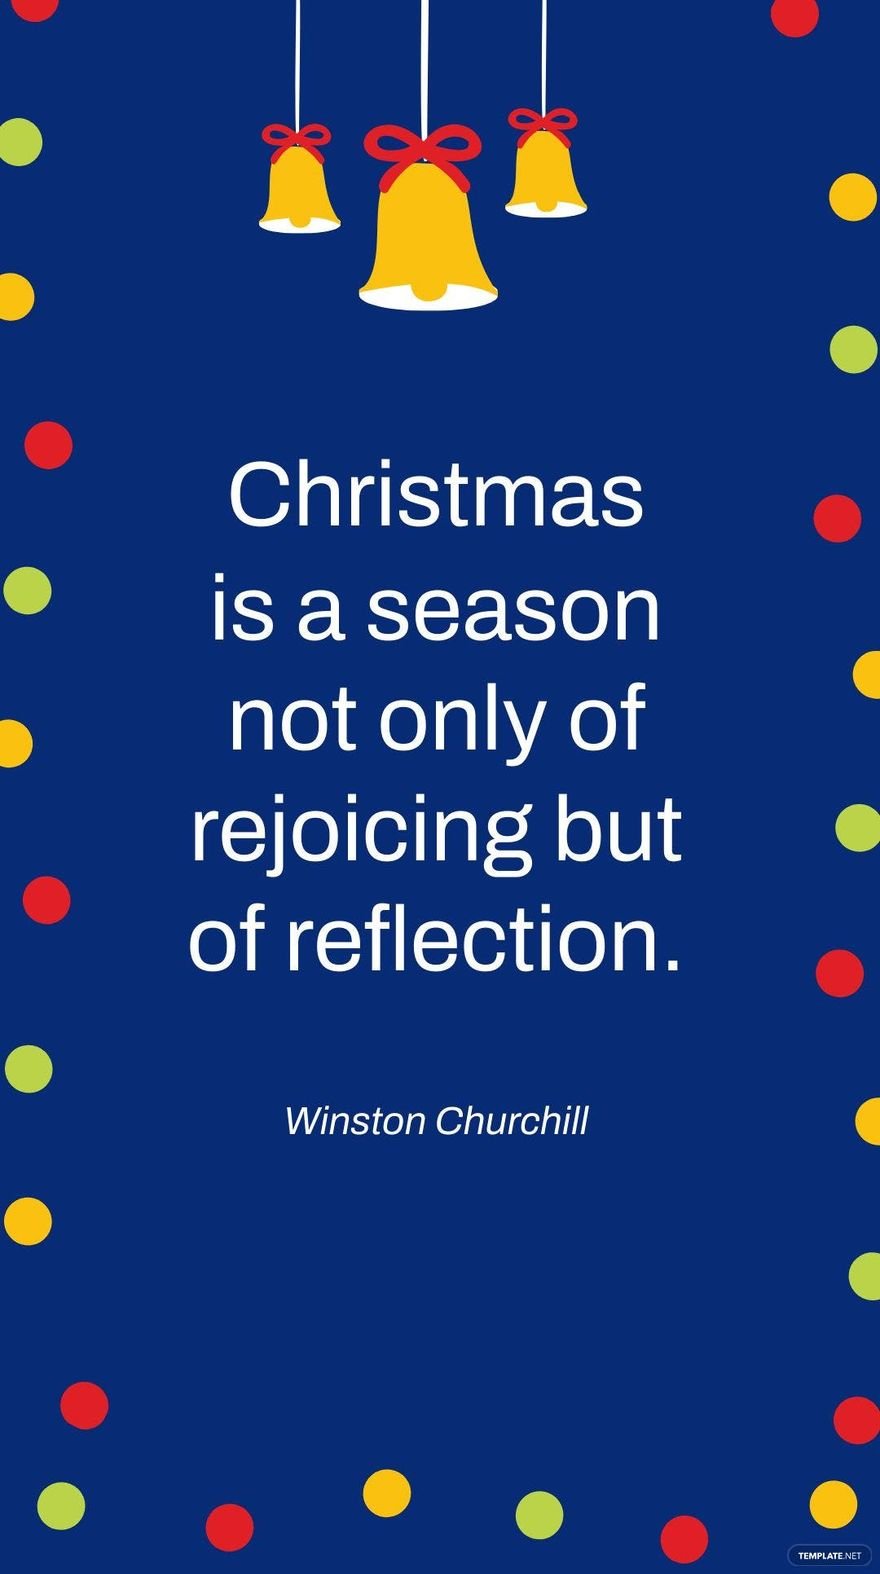 Winston Churchill - Christmas is a season not only of rejoicing but of reflection.